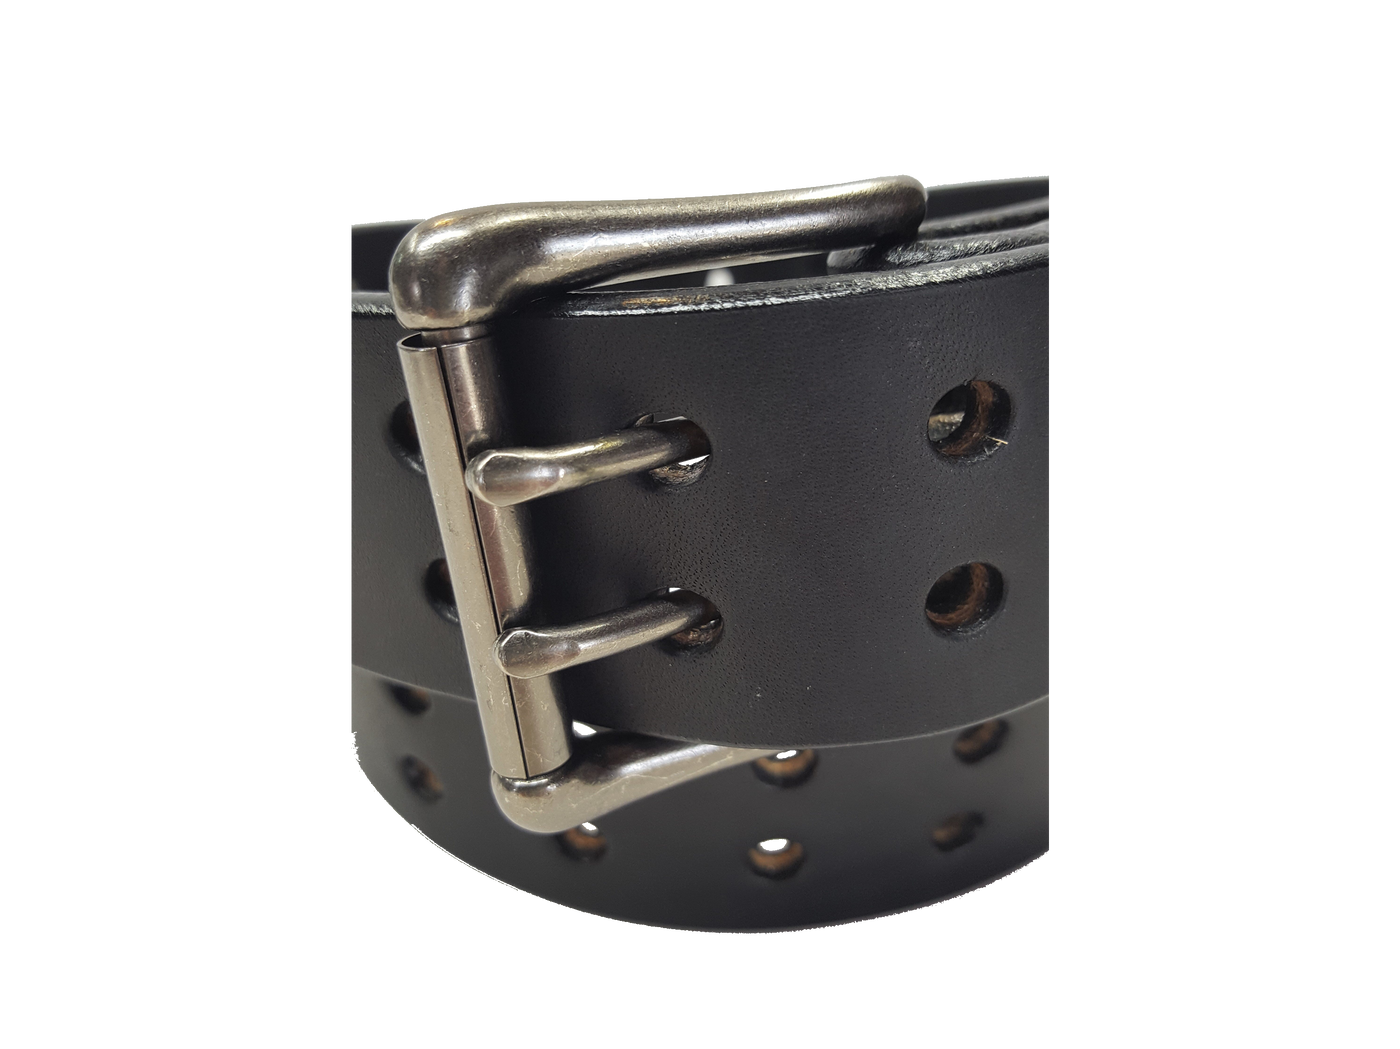 Our handmade Extra Heavy double hole leather belt is made from 12-14 oz. (approx 1/4" thick) bridle cowhide leather that is drum dyed all the way through. The double holes run the length of the belt. Buckle is a heavy double pronged roller buckle with antique nickel plated finish that is snapped in place on the end.  The width is 1 3/4", edges are smoothed and painted.  Made just outside Nashville in Smyrna, TN.  Available in black or brown.